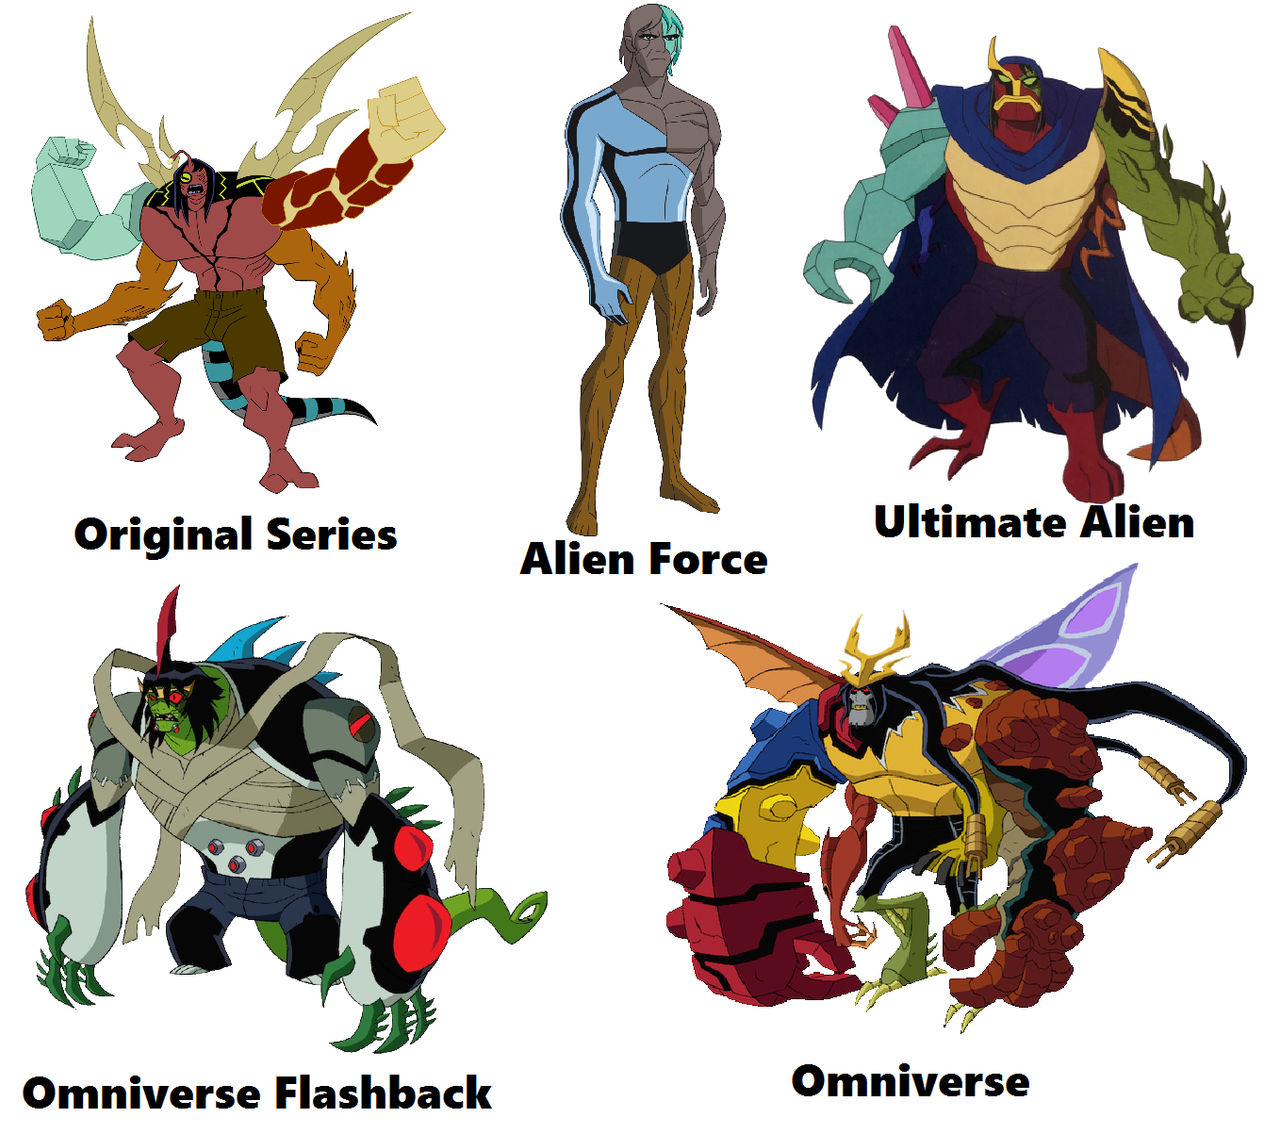 Ben 10 Reboot - The Aliens of Kevin 11 by dlee1293847 on DeviantArt